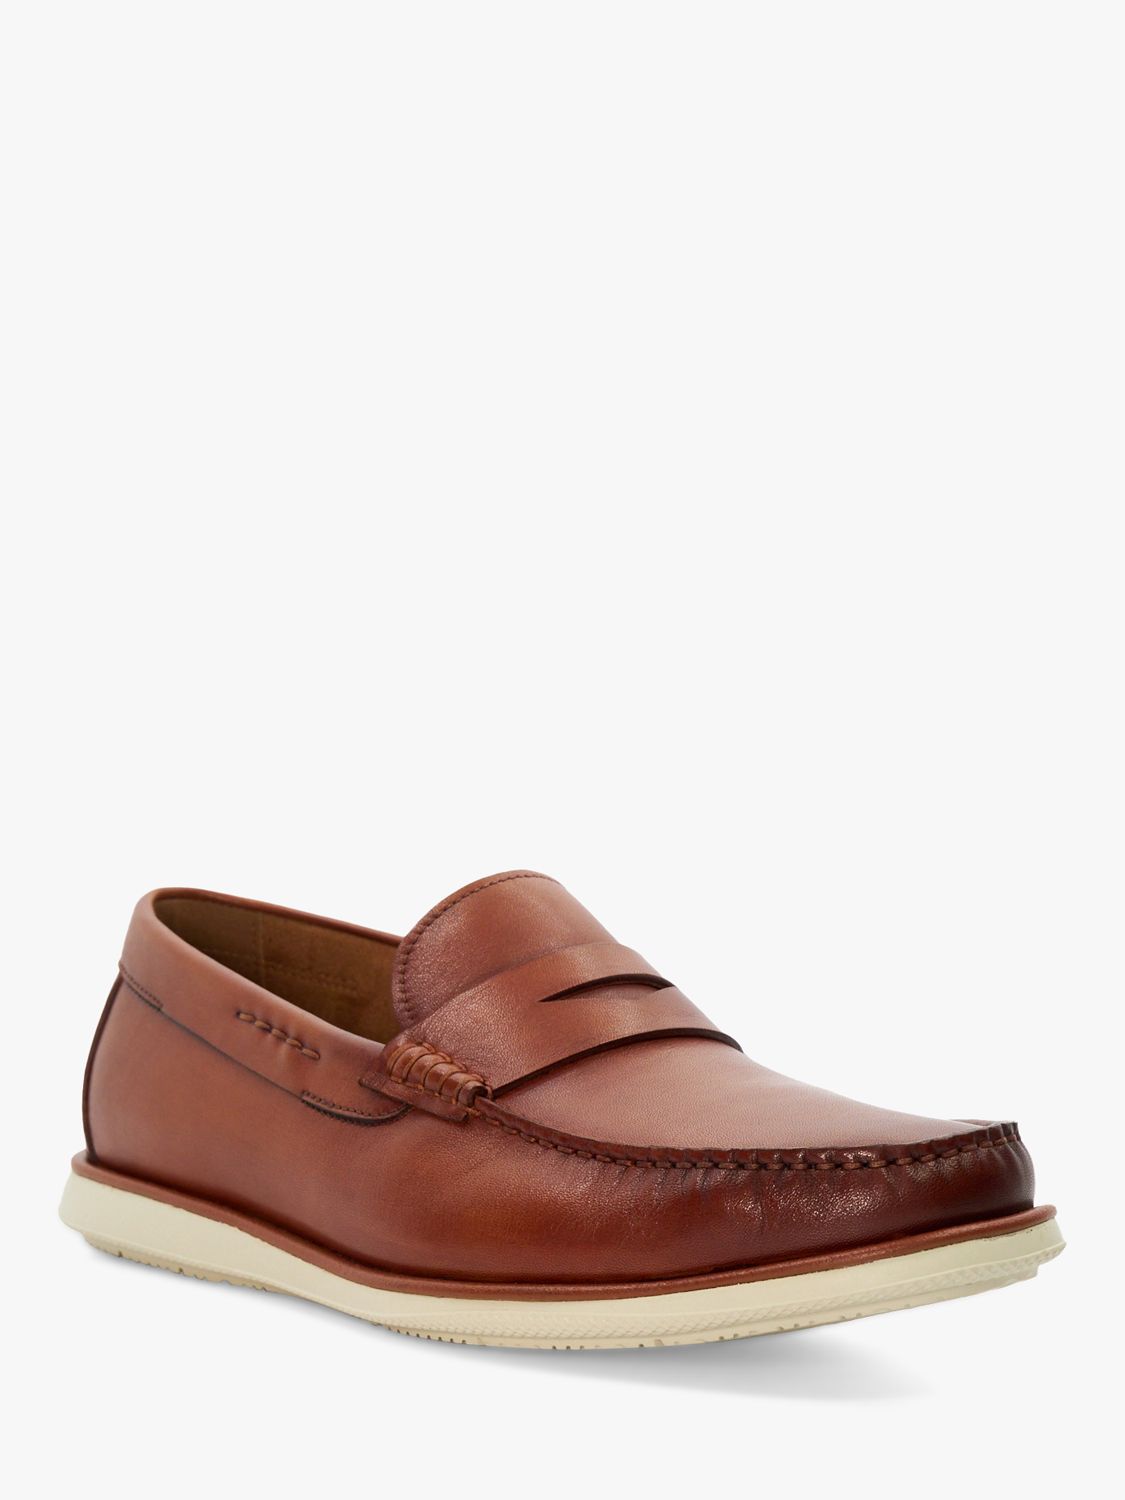 Buy Dune Wide Fit Berkly Leather White Sole Loafers, Tan Online at johnlewis.com